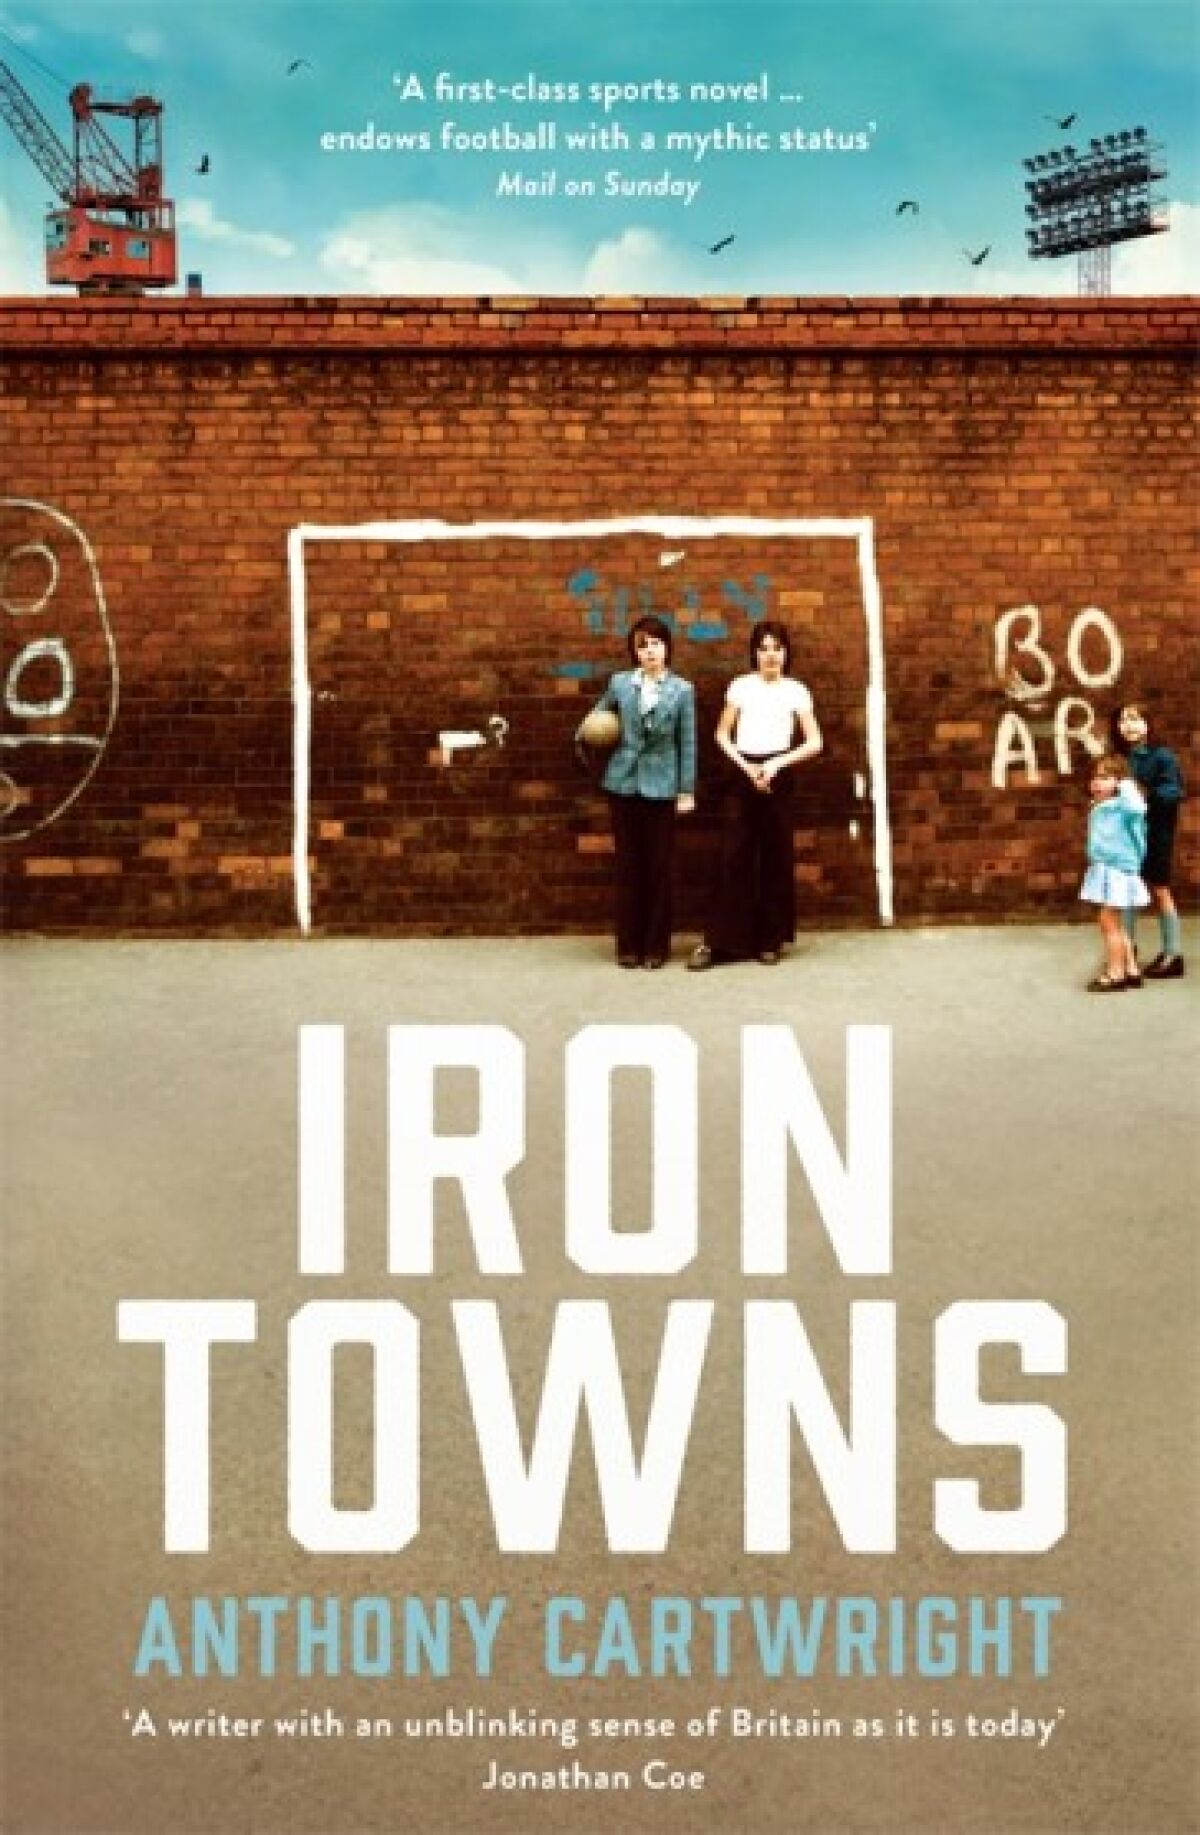 Book jacket for "Iron Towns" by Anthony Cartwright. For Sunday Books story 5/24/20, about eight books to travel with.